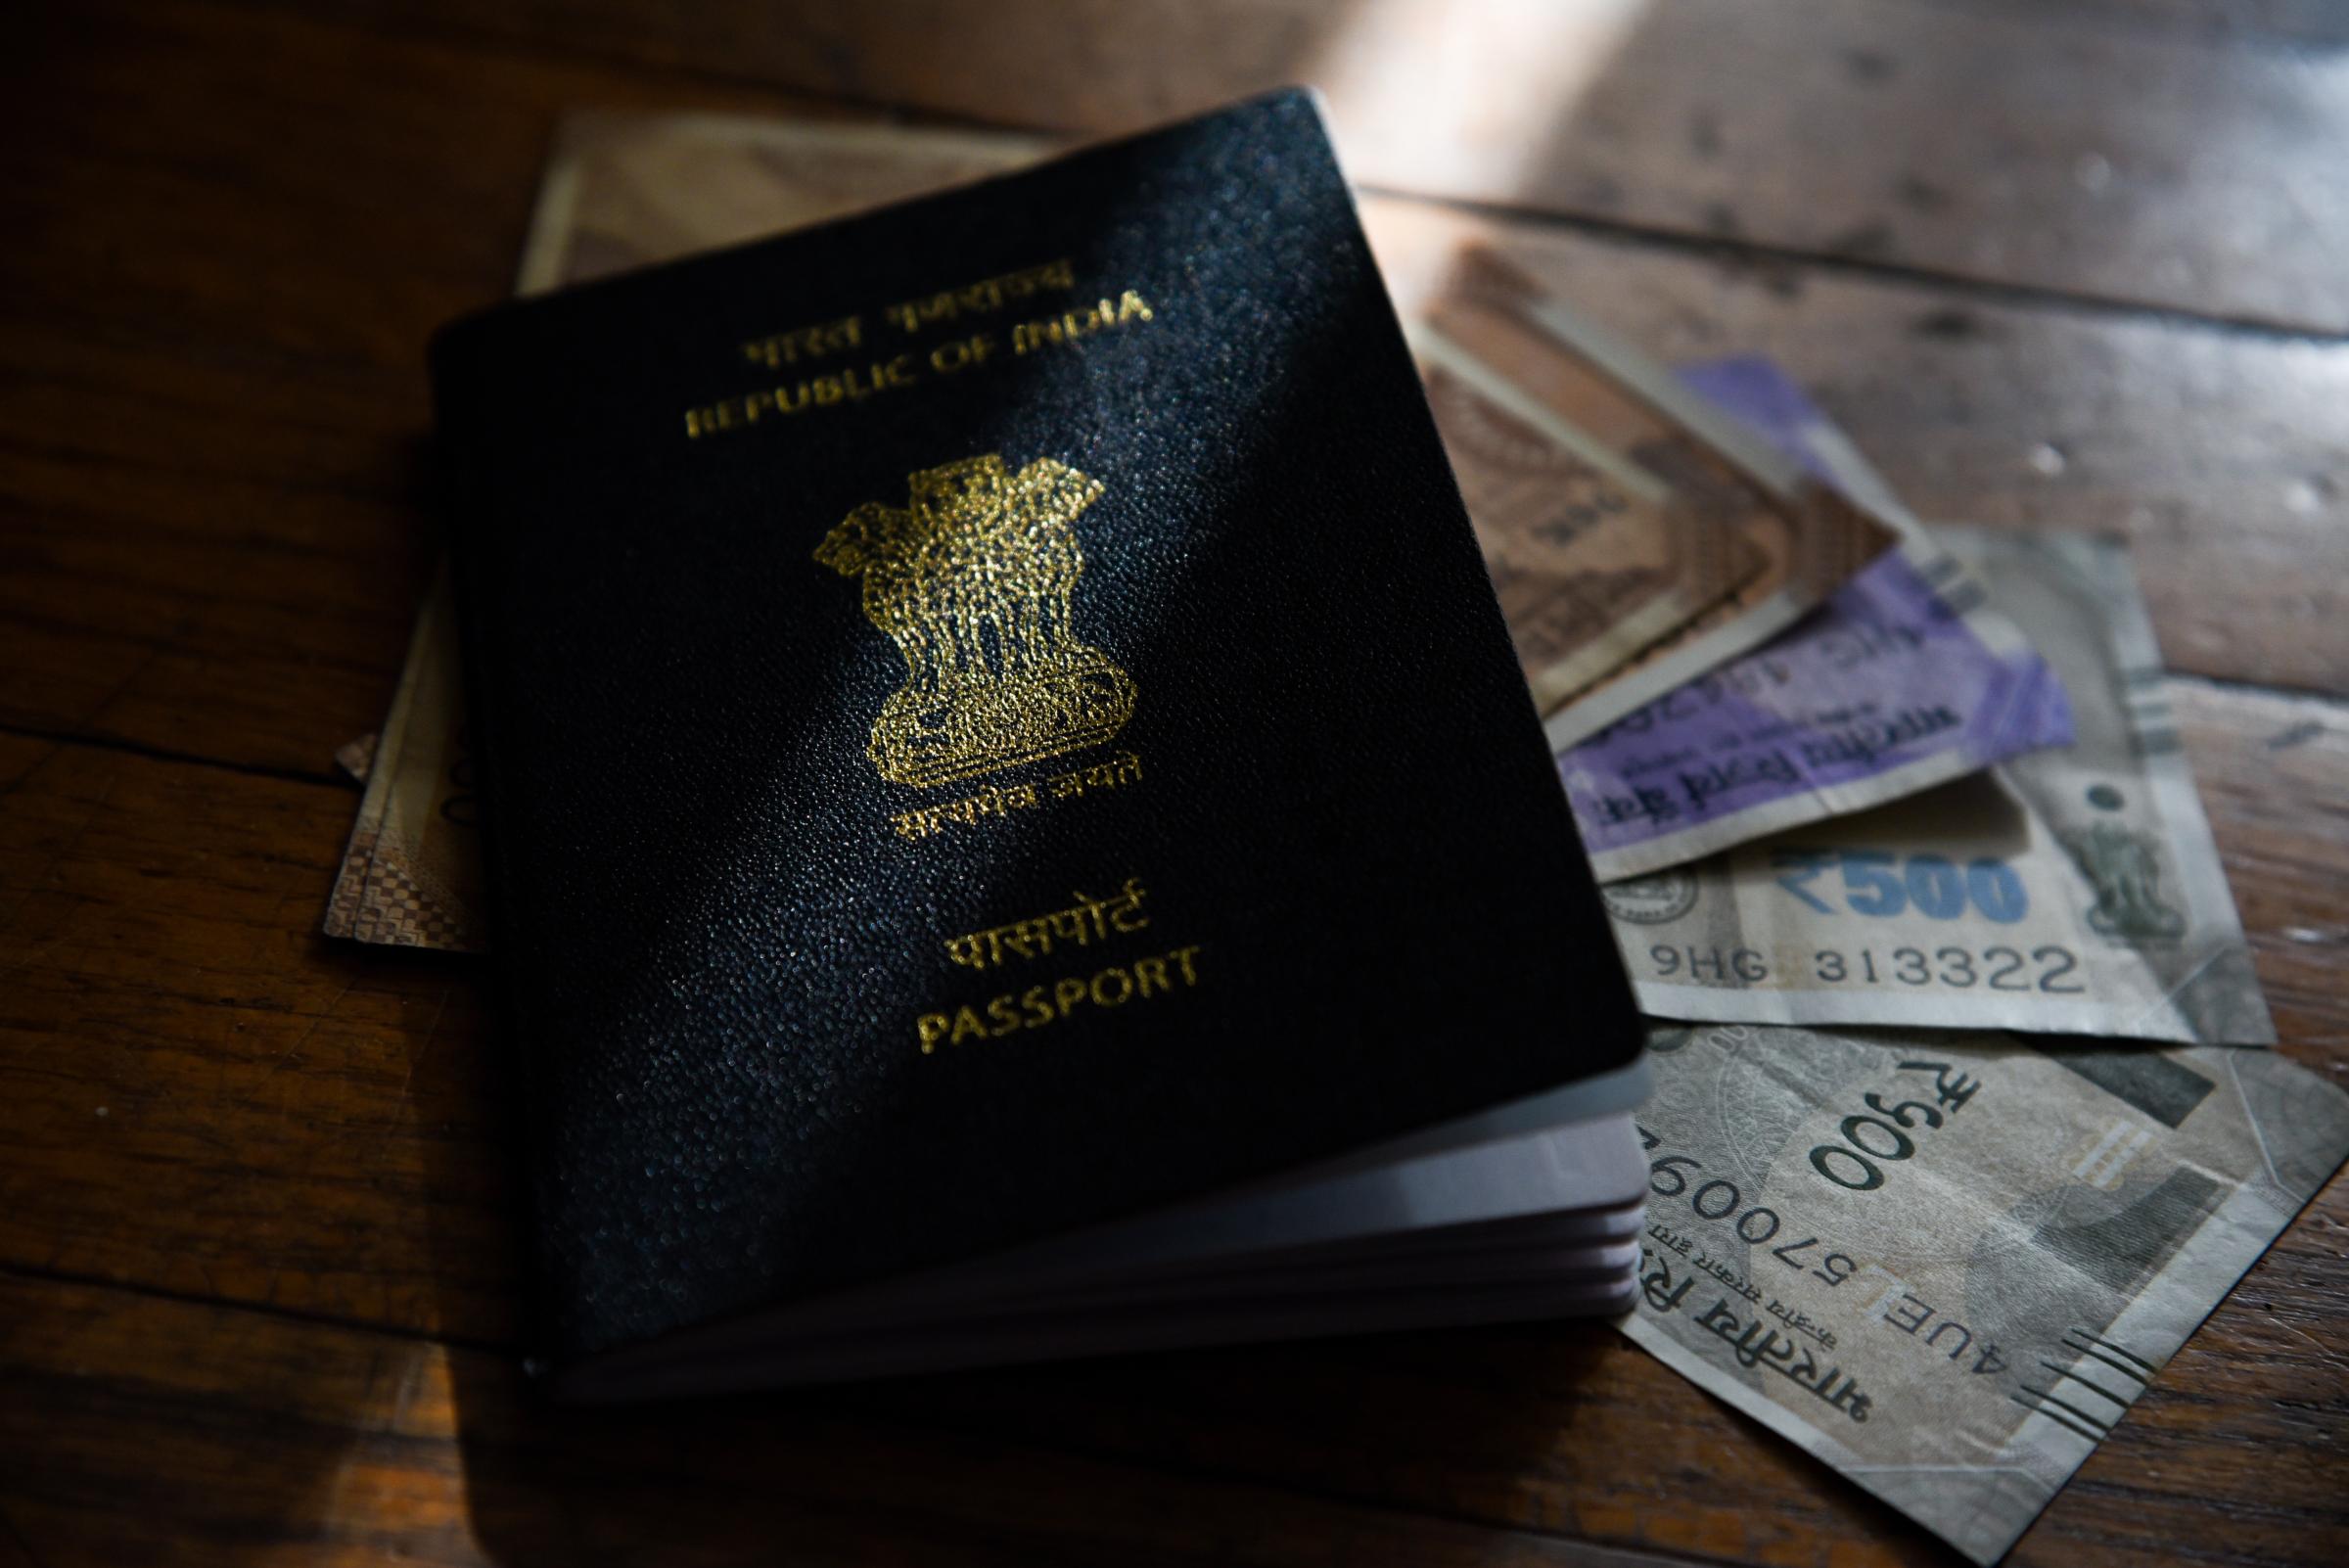 A New Beginning Amidst A Pandemic  -   Passport, tickets, and my dreams all bundled in a...